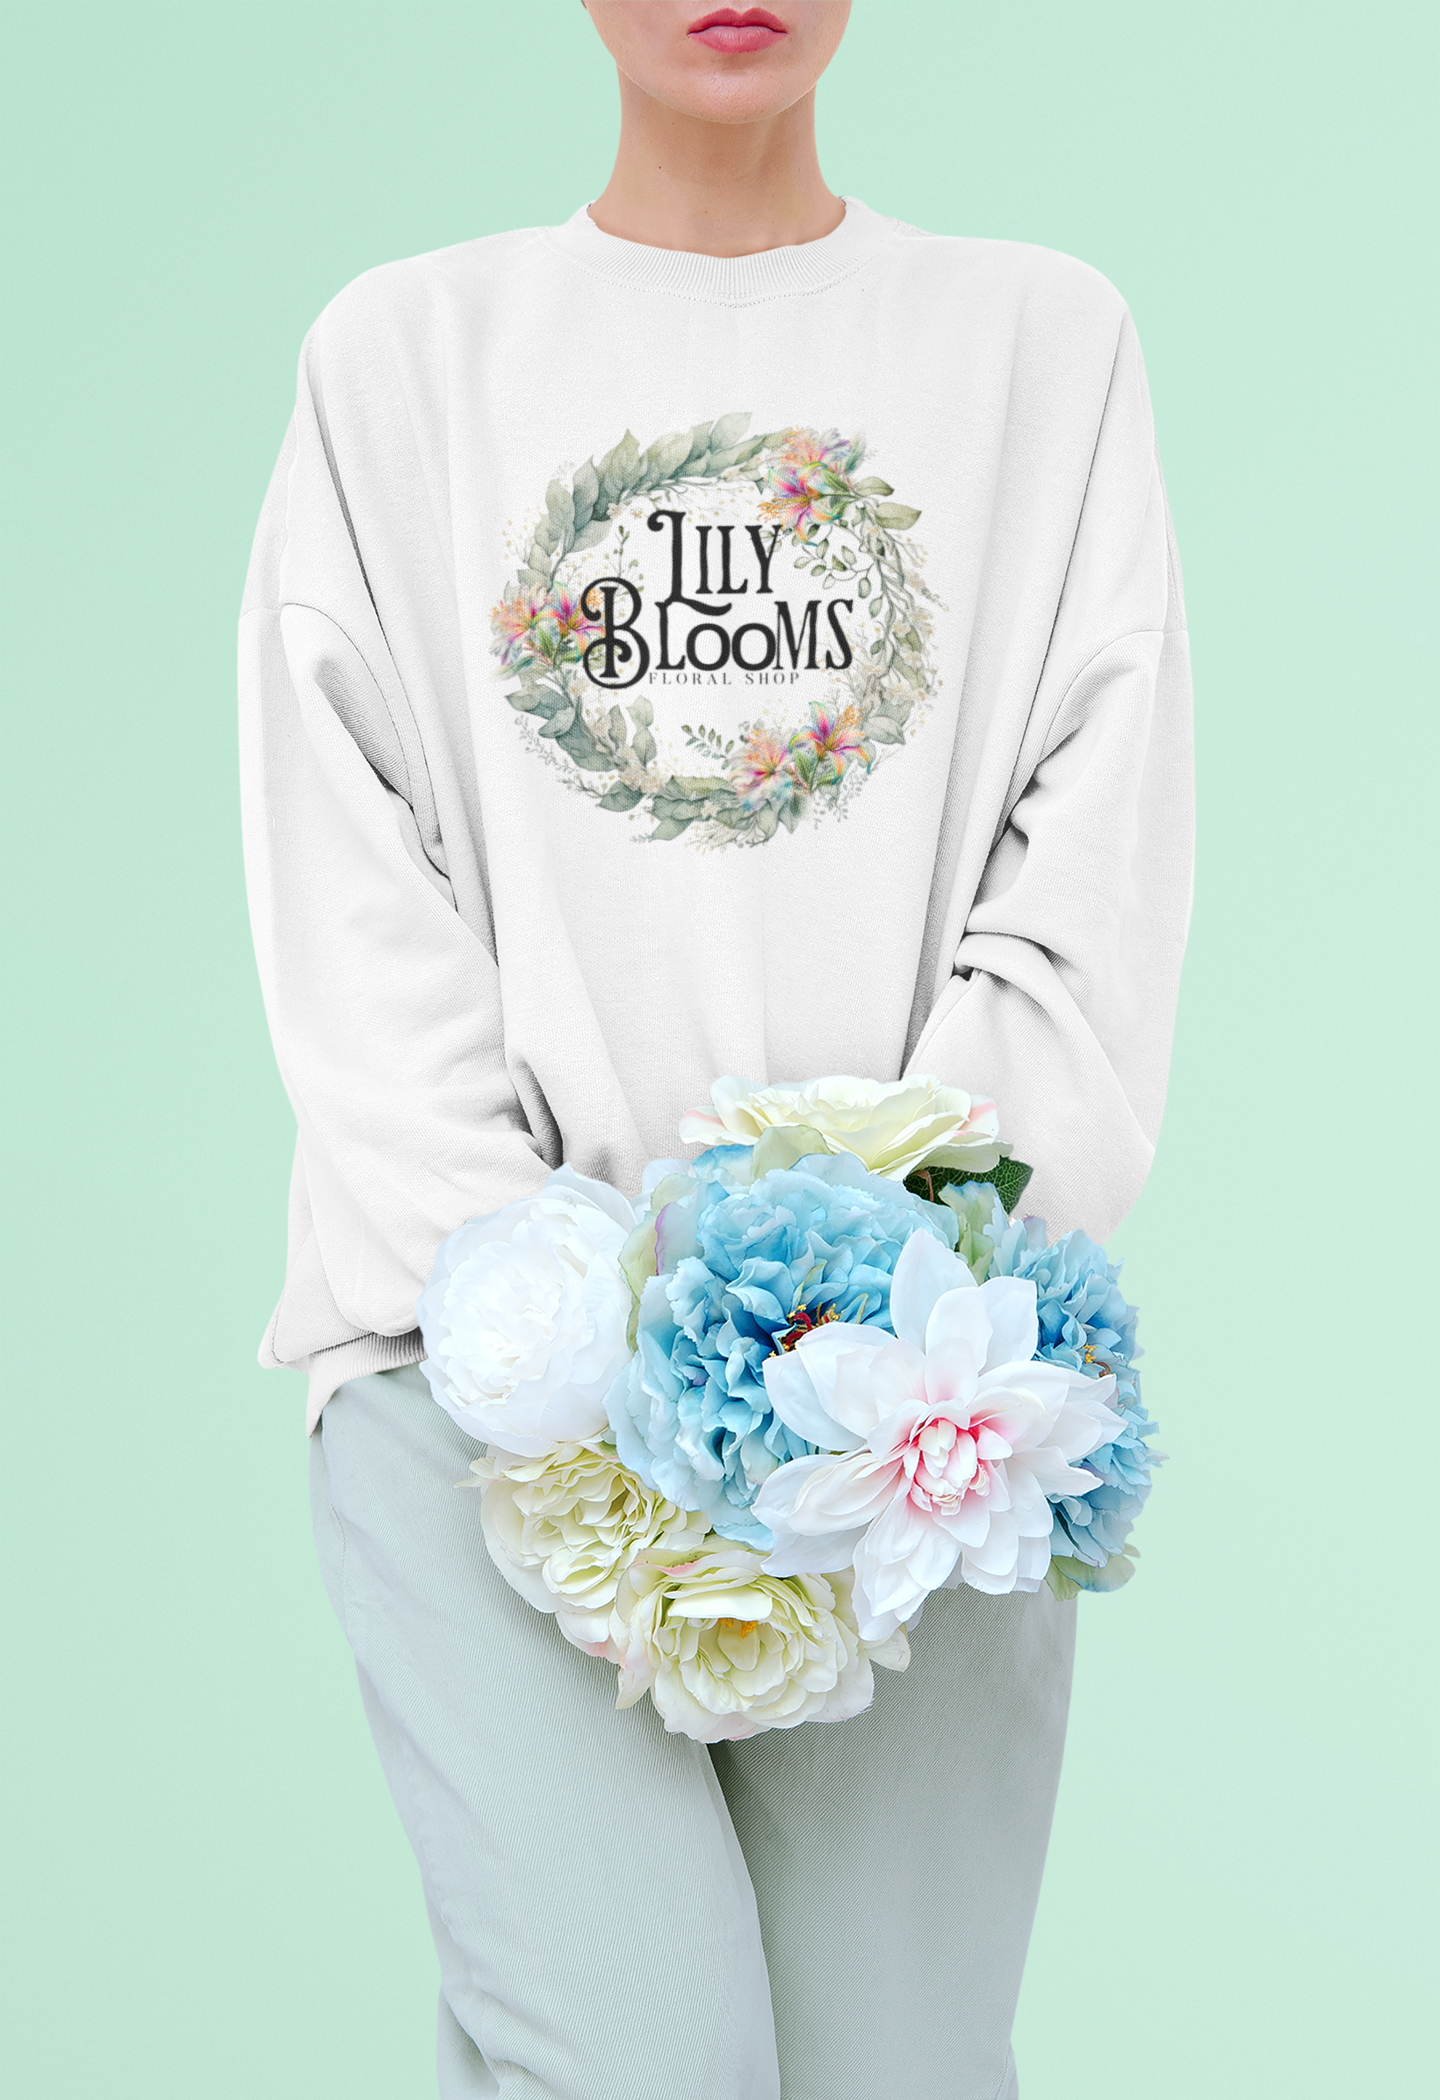 Lily Blooms Floral Shop. - It Ends With Us - Sweatshirt - Coho Booktok Colleen Hoover It Ends With Us